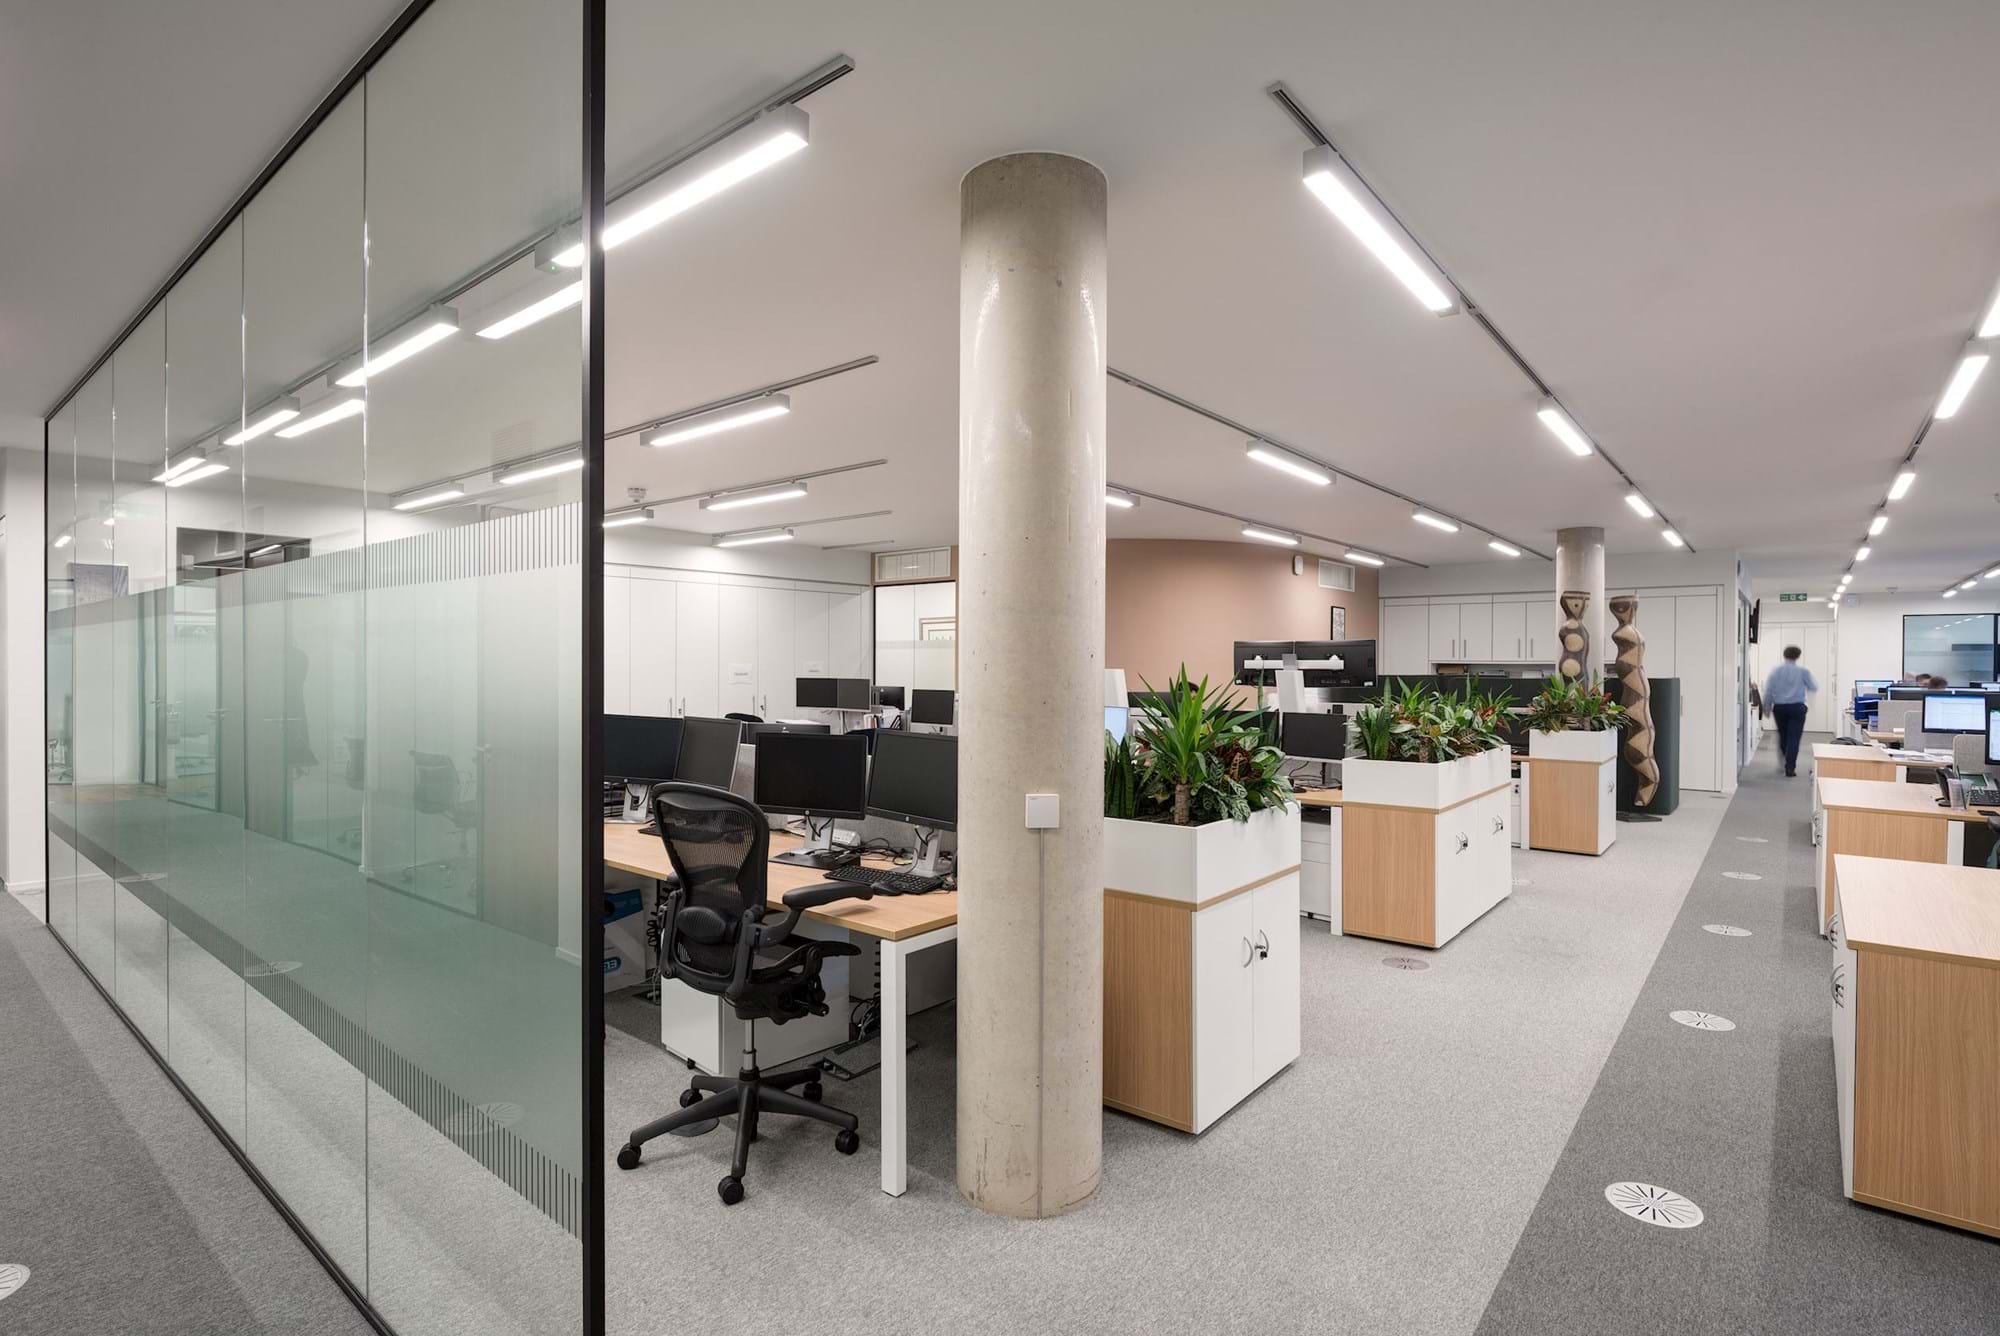 Modus Workspace office design, fit out and refurbishment - First Quantum Minerals - FQM 08 highres sRGB.jpg